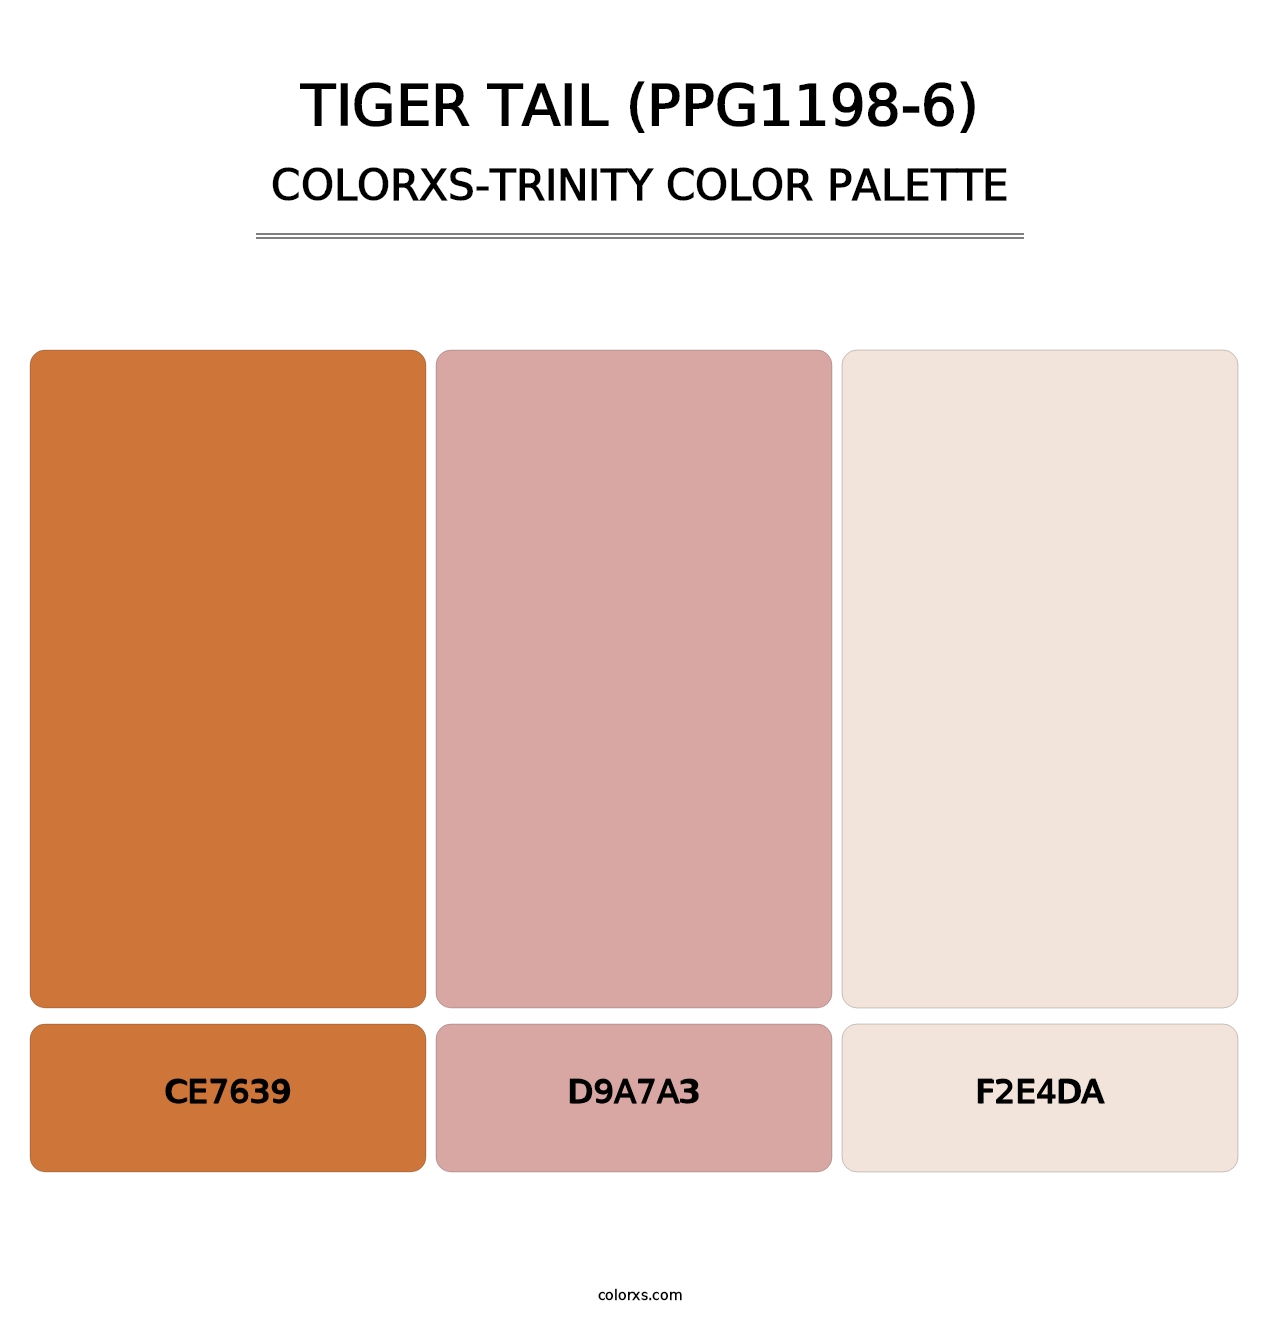 Tiger Tail (PPG1198-6) - Colorxs Trinity Palette